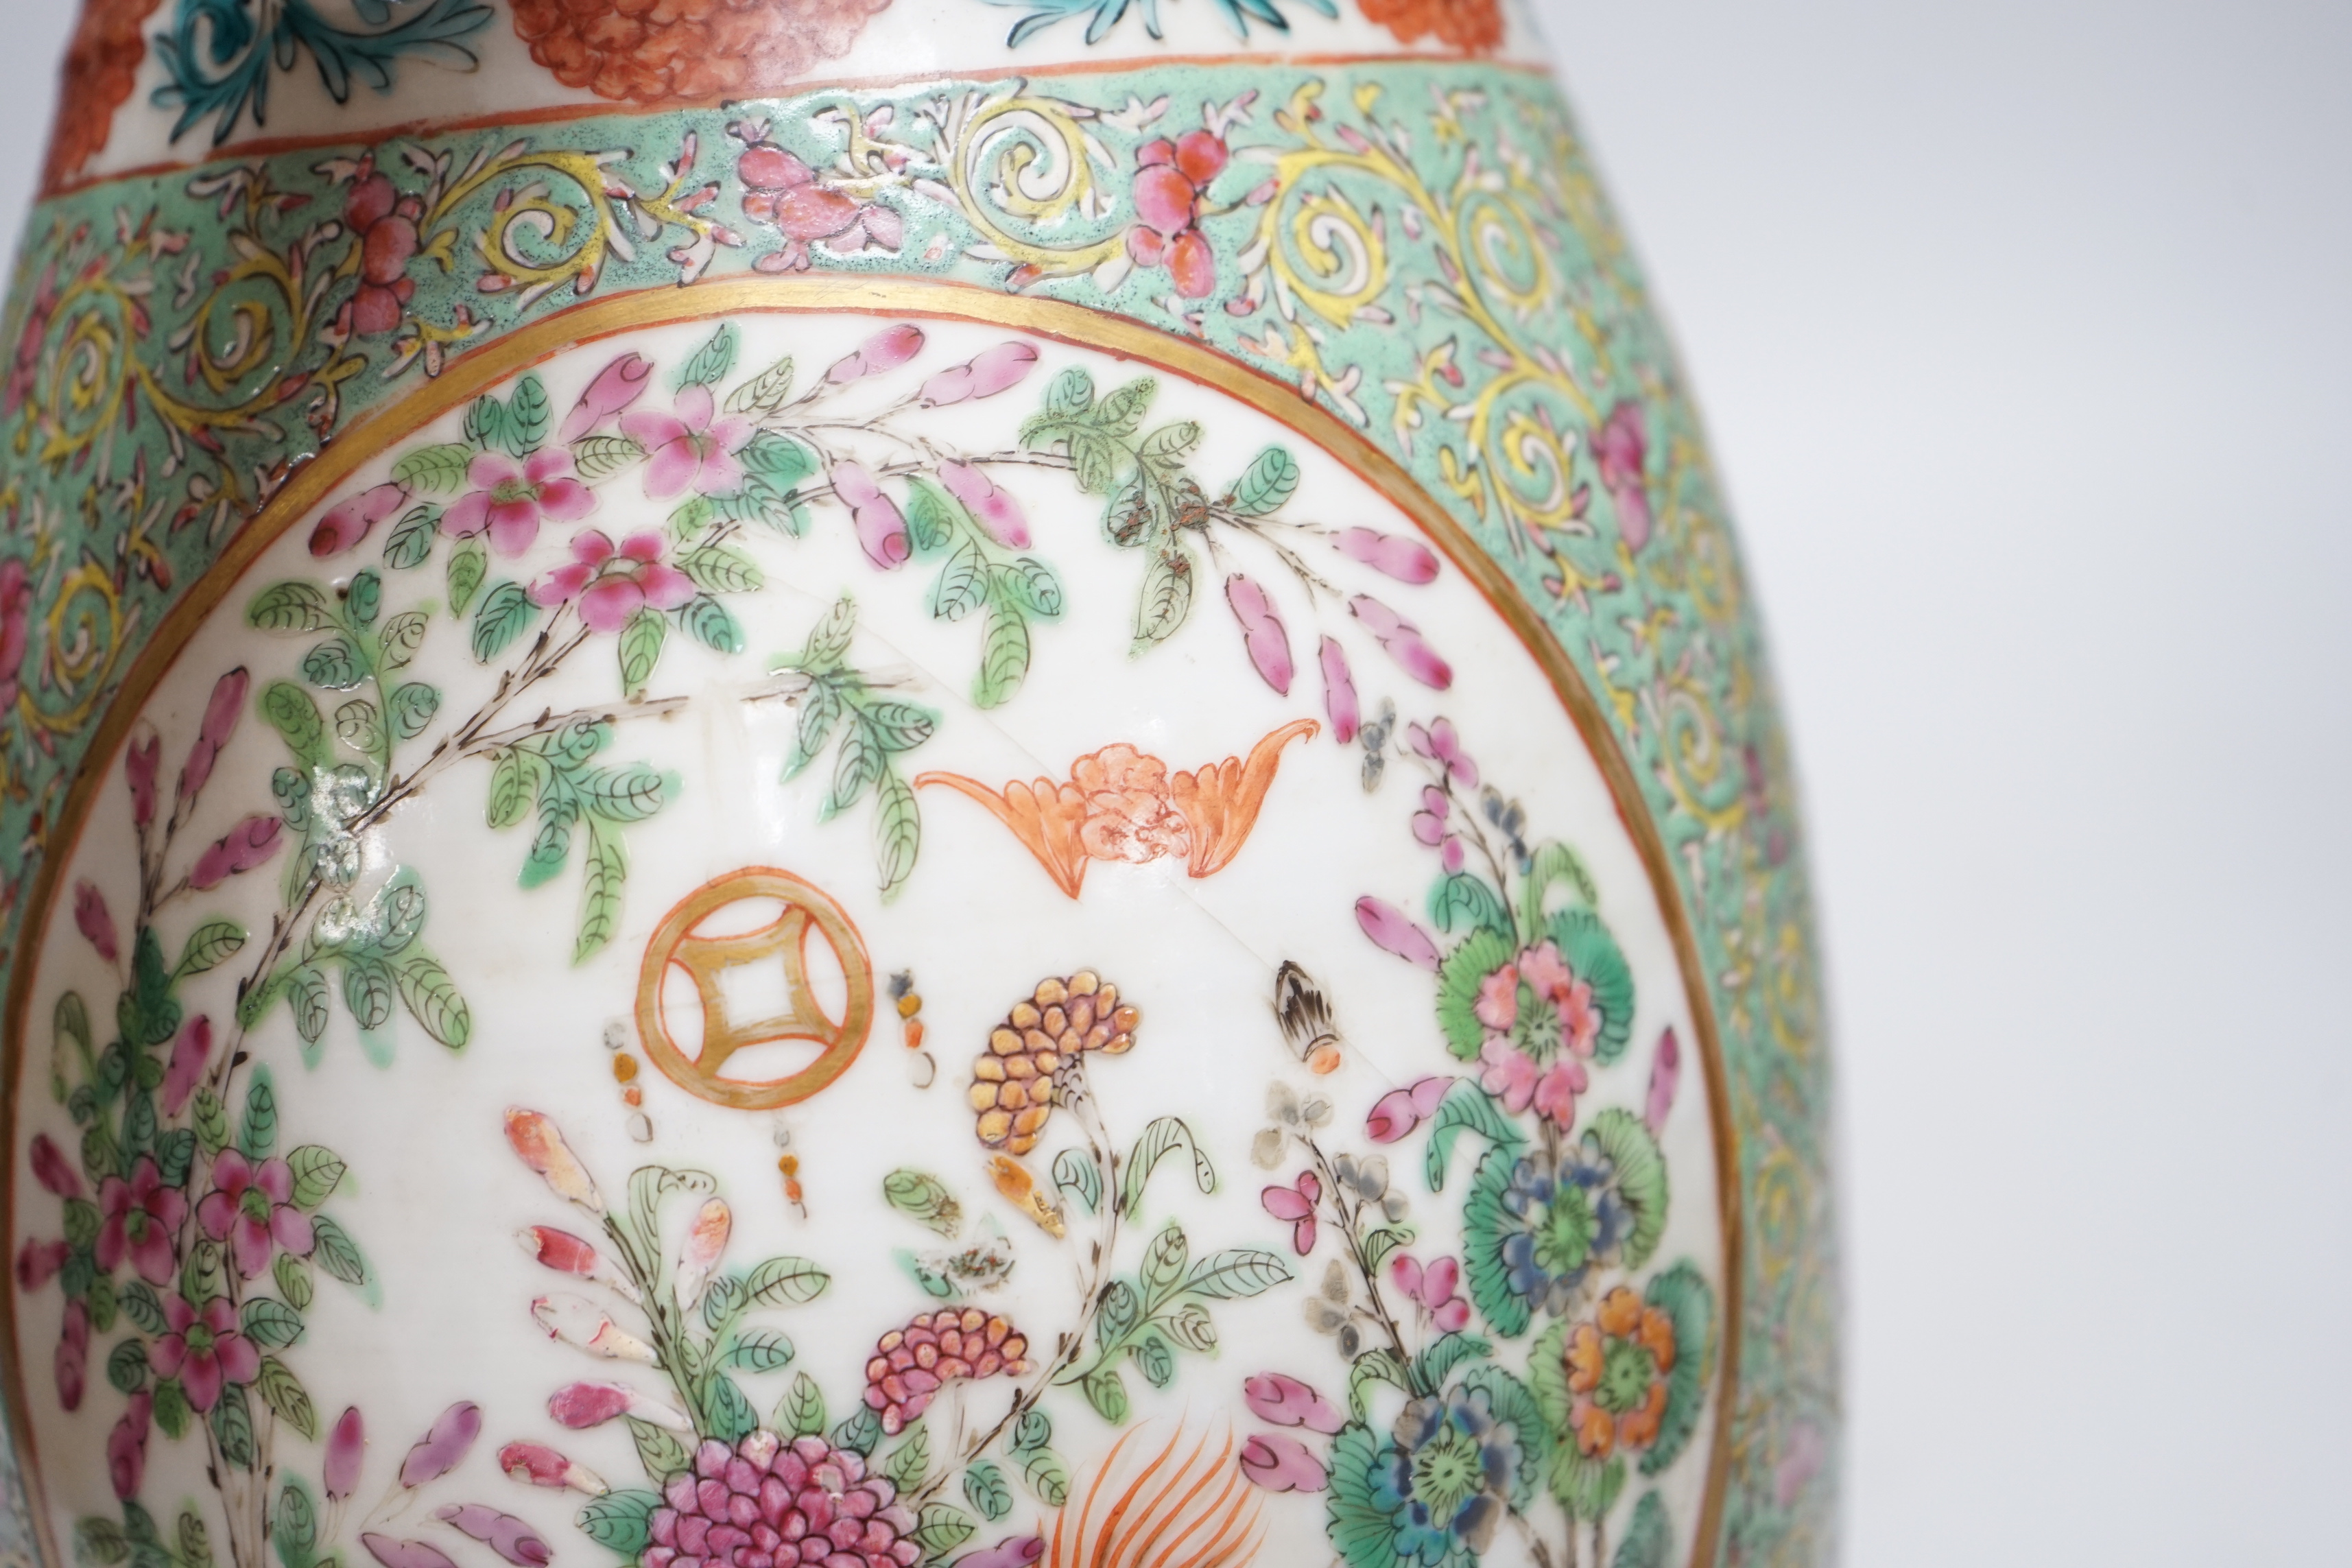 A 19th century Chinese enamelled porcelain vase on a green ground, 36.5cm - Image 6 of 7